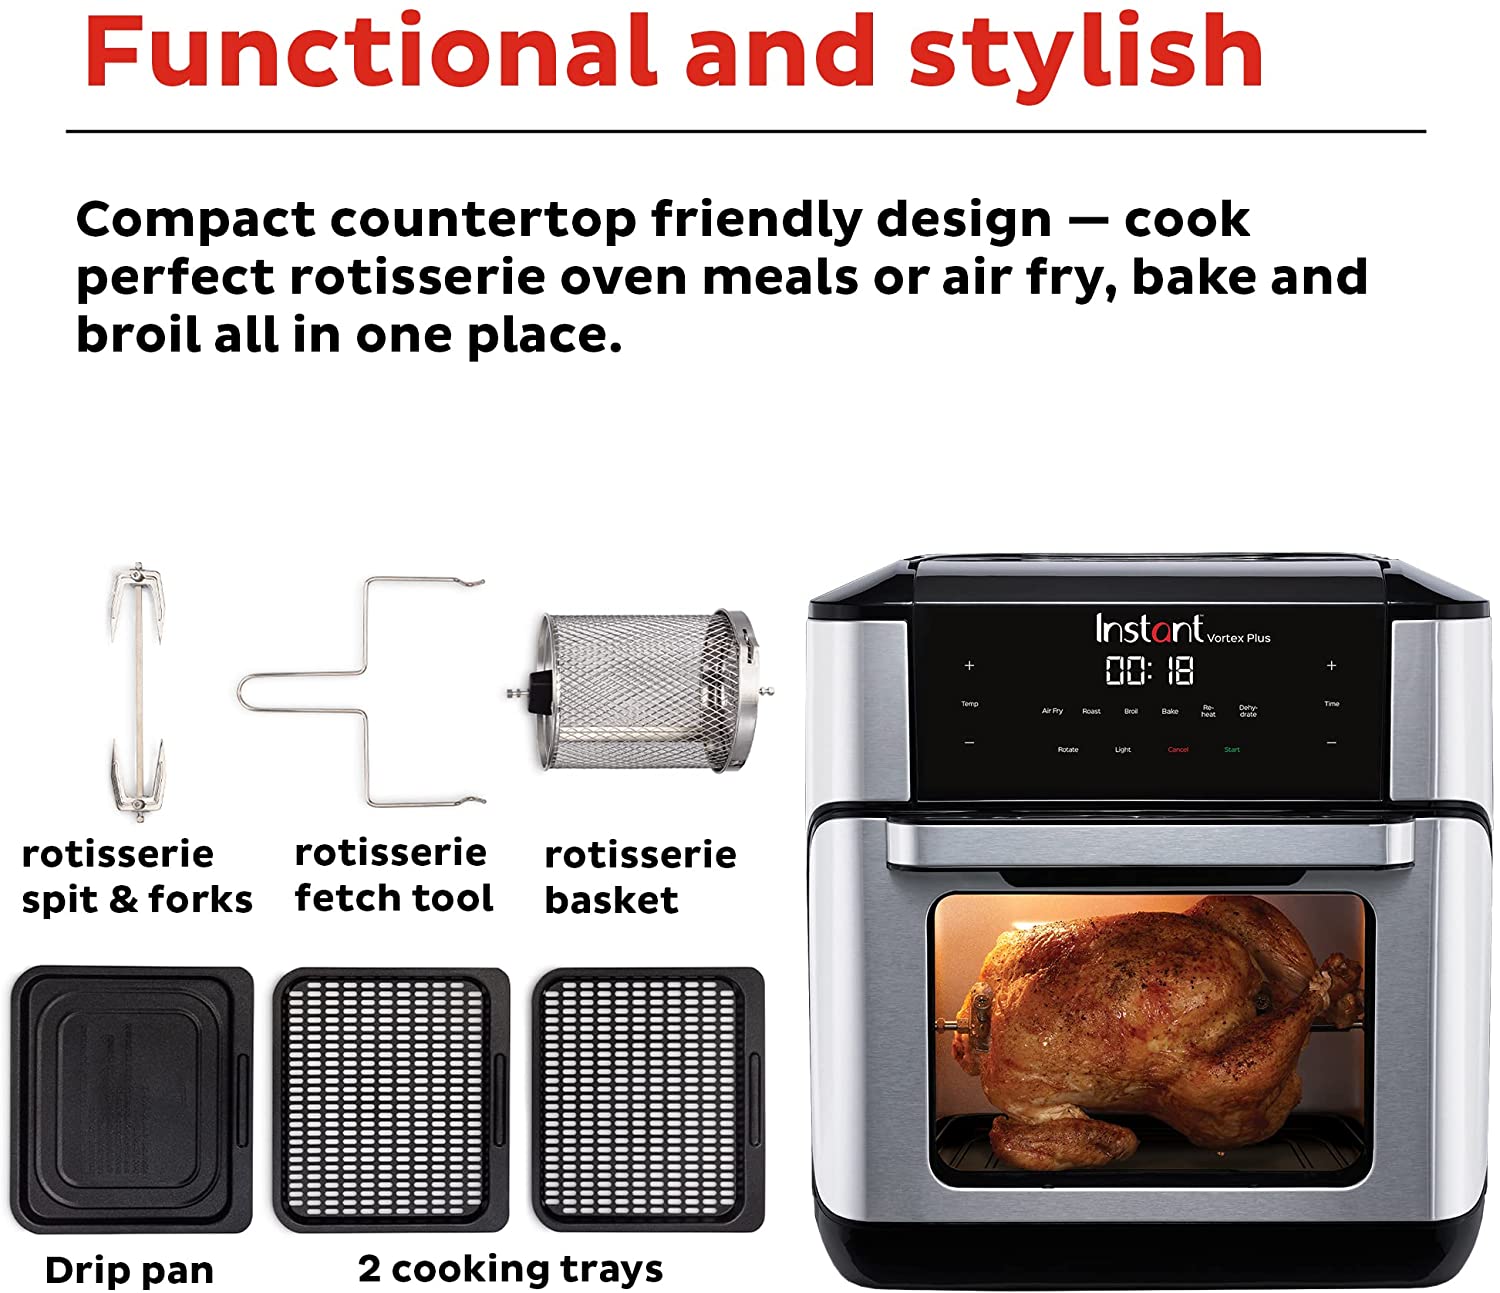 10 in1 Air Fryer 6Qt Smart Electric Hot Airfryer Oven Oilles